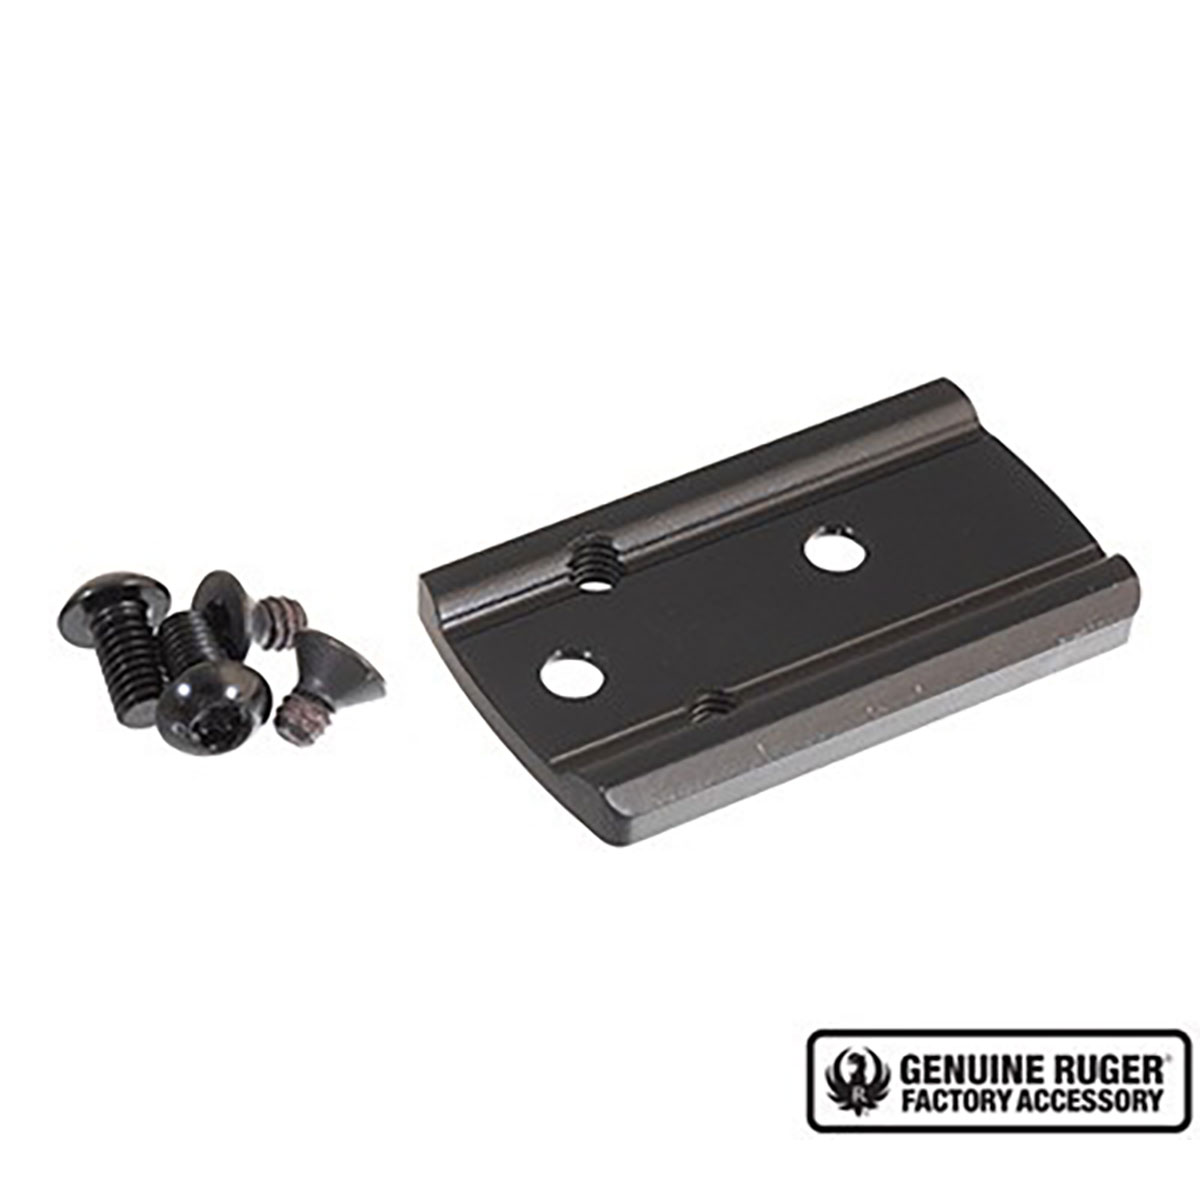 RUGER - OPTIC ADAPTER PLATE FOR RUGER 57